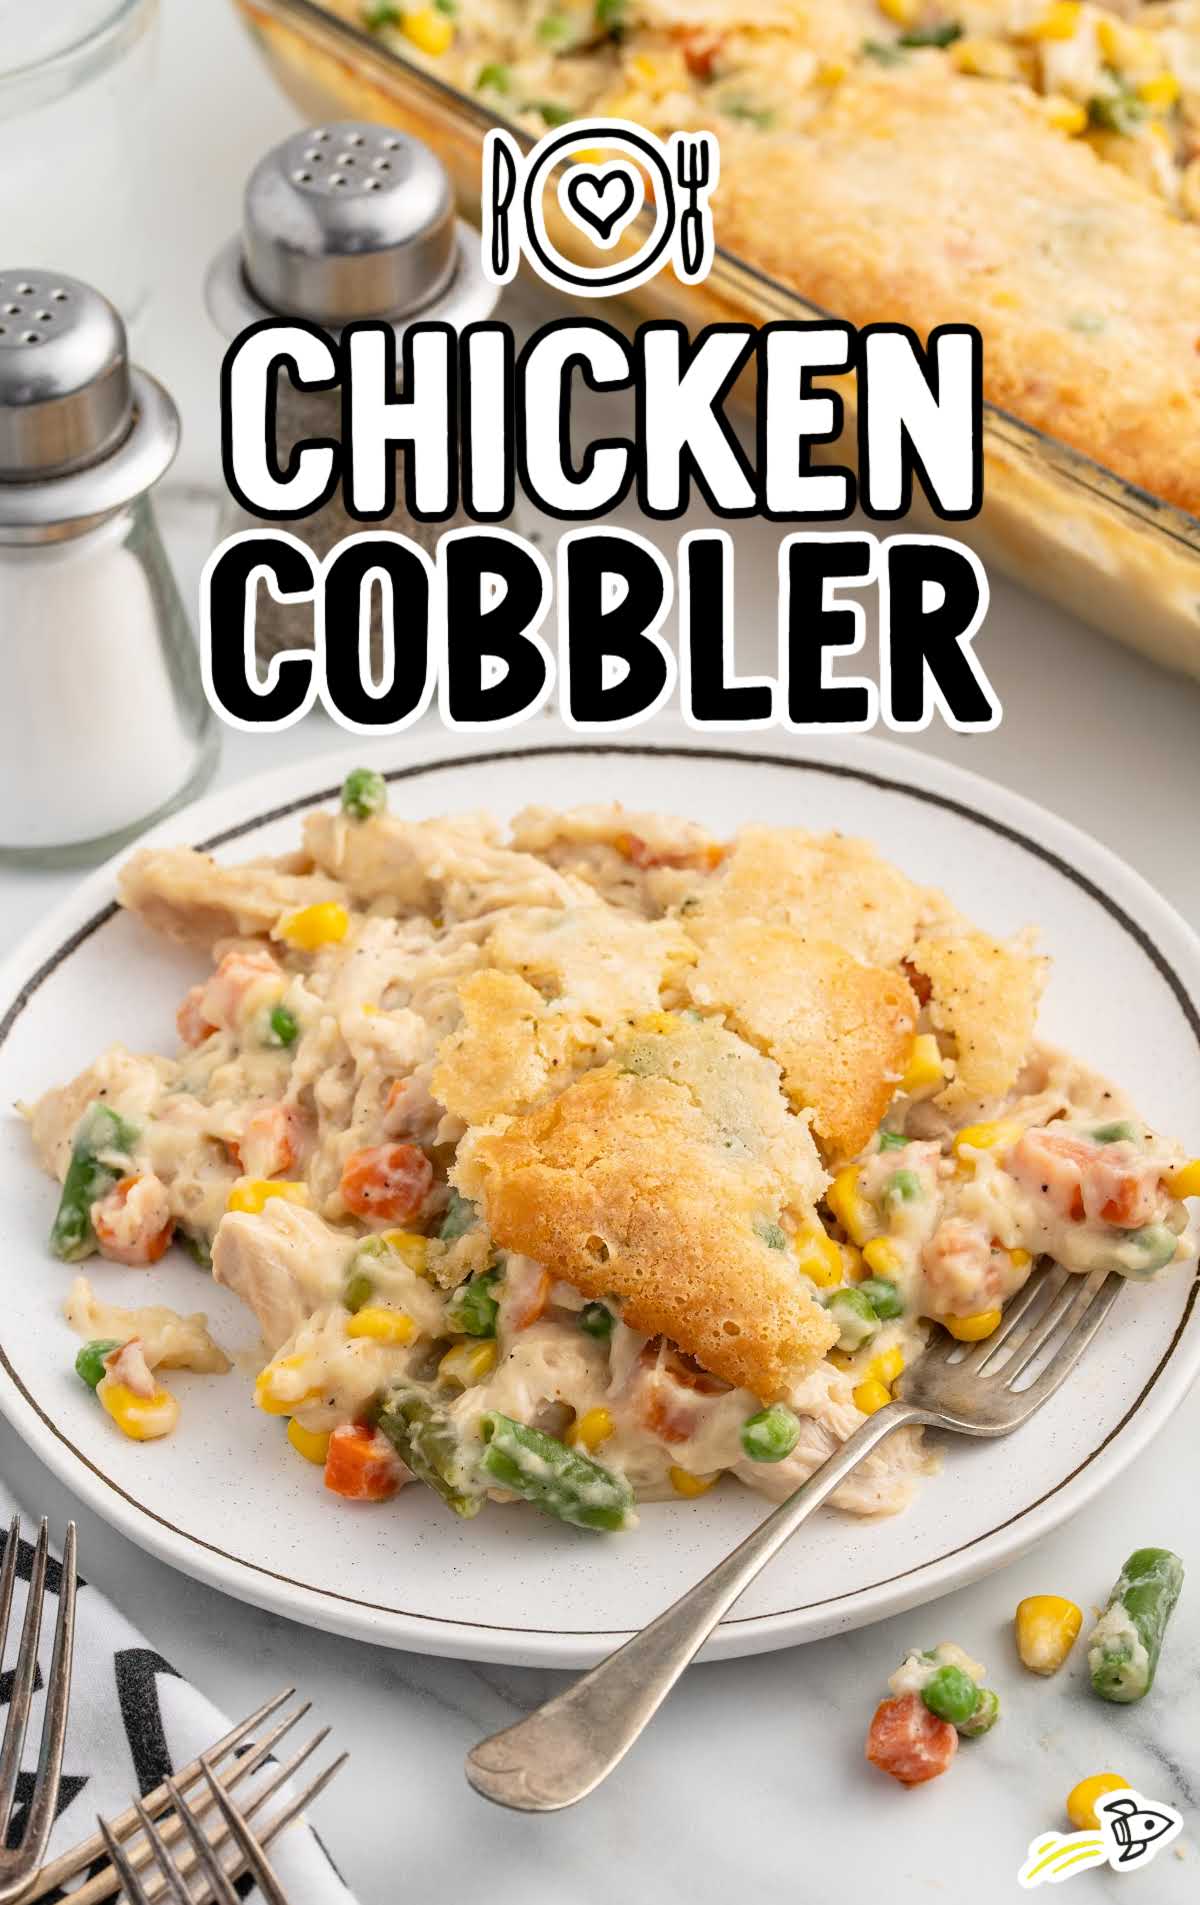 a plate of Chicken Cobbler with a fork